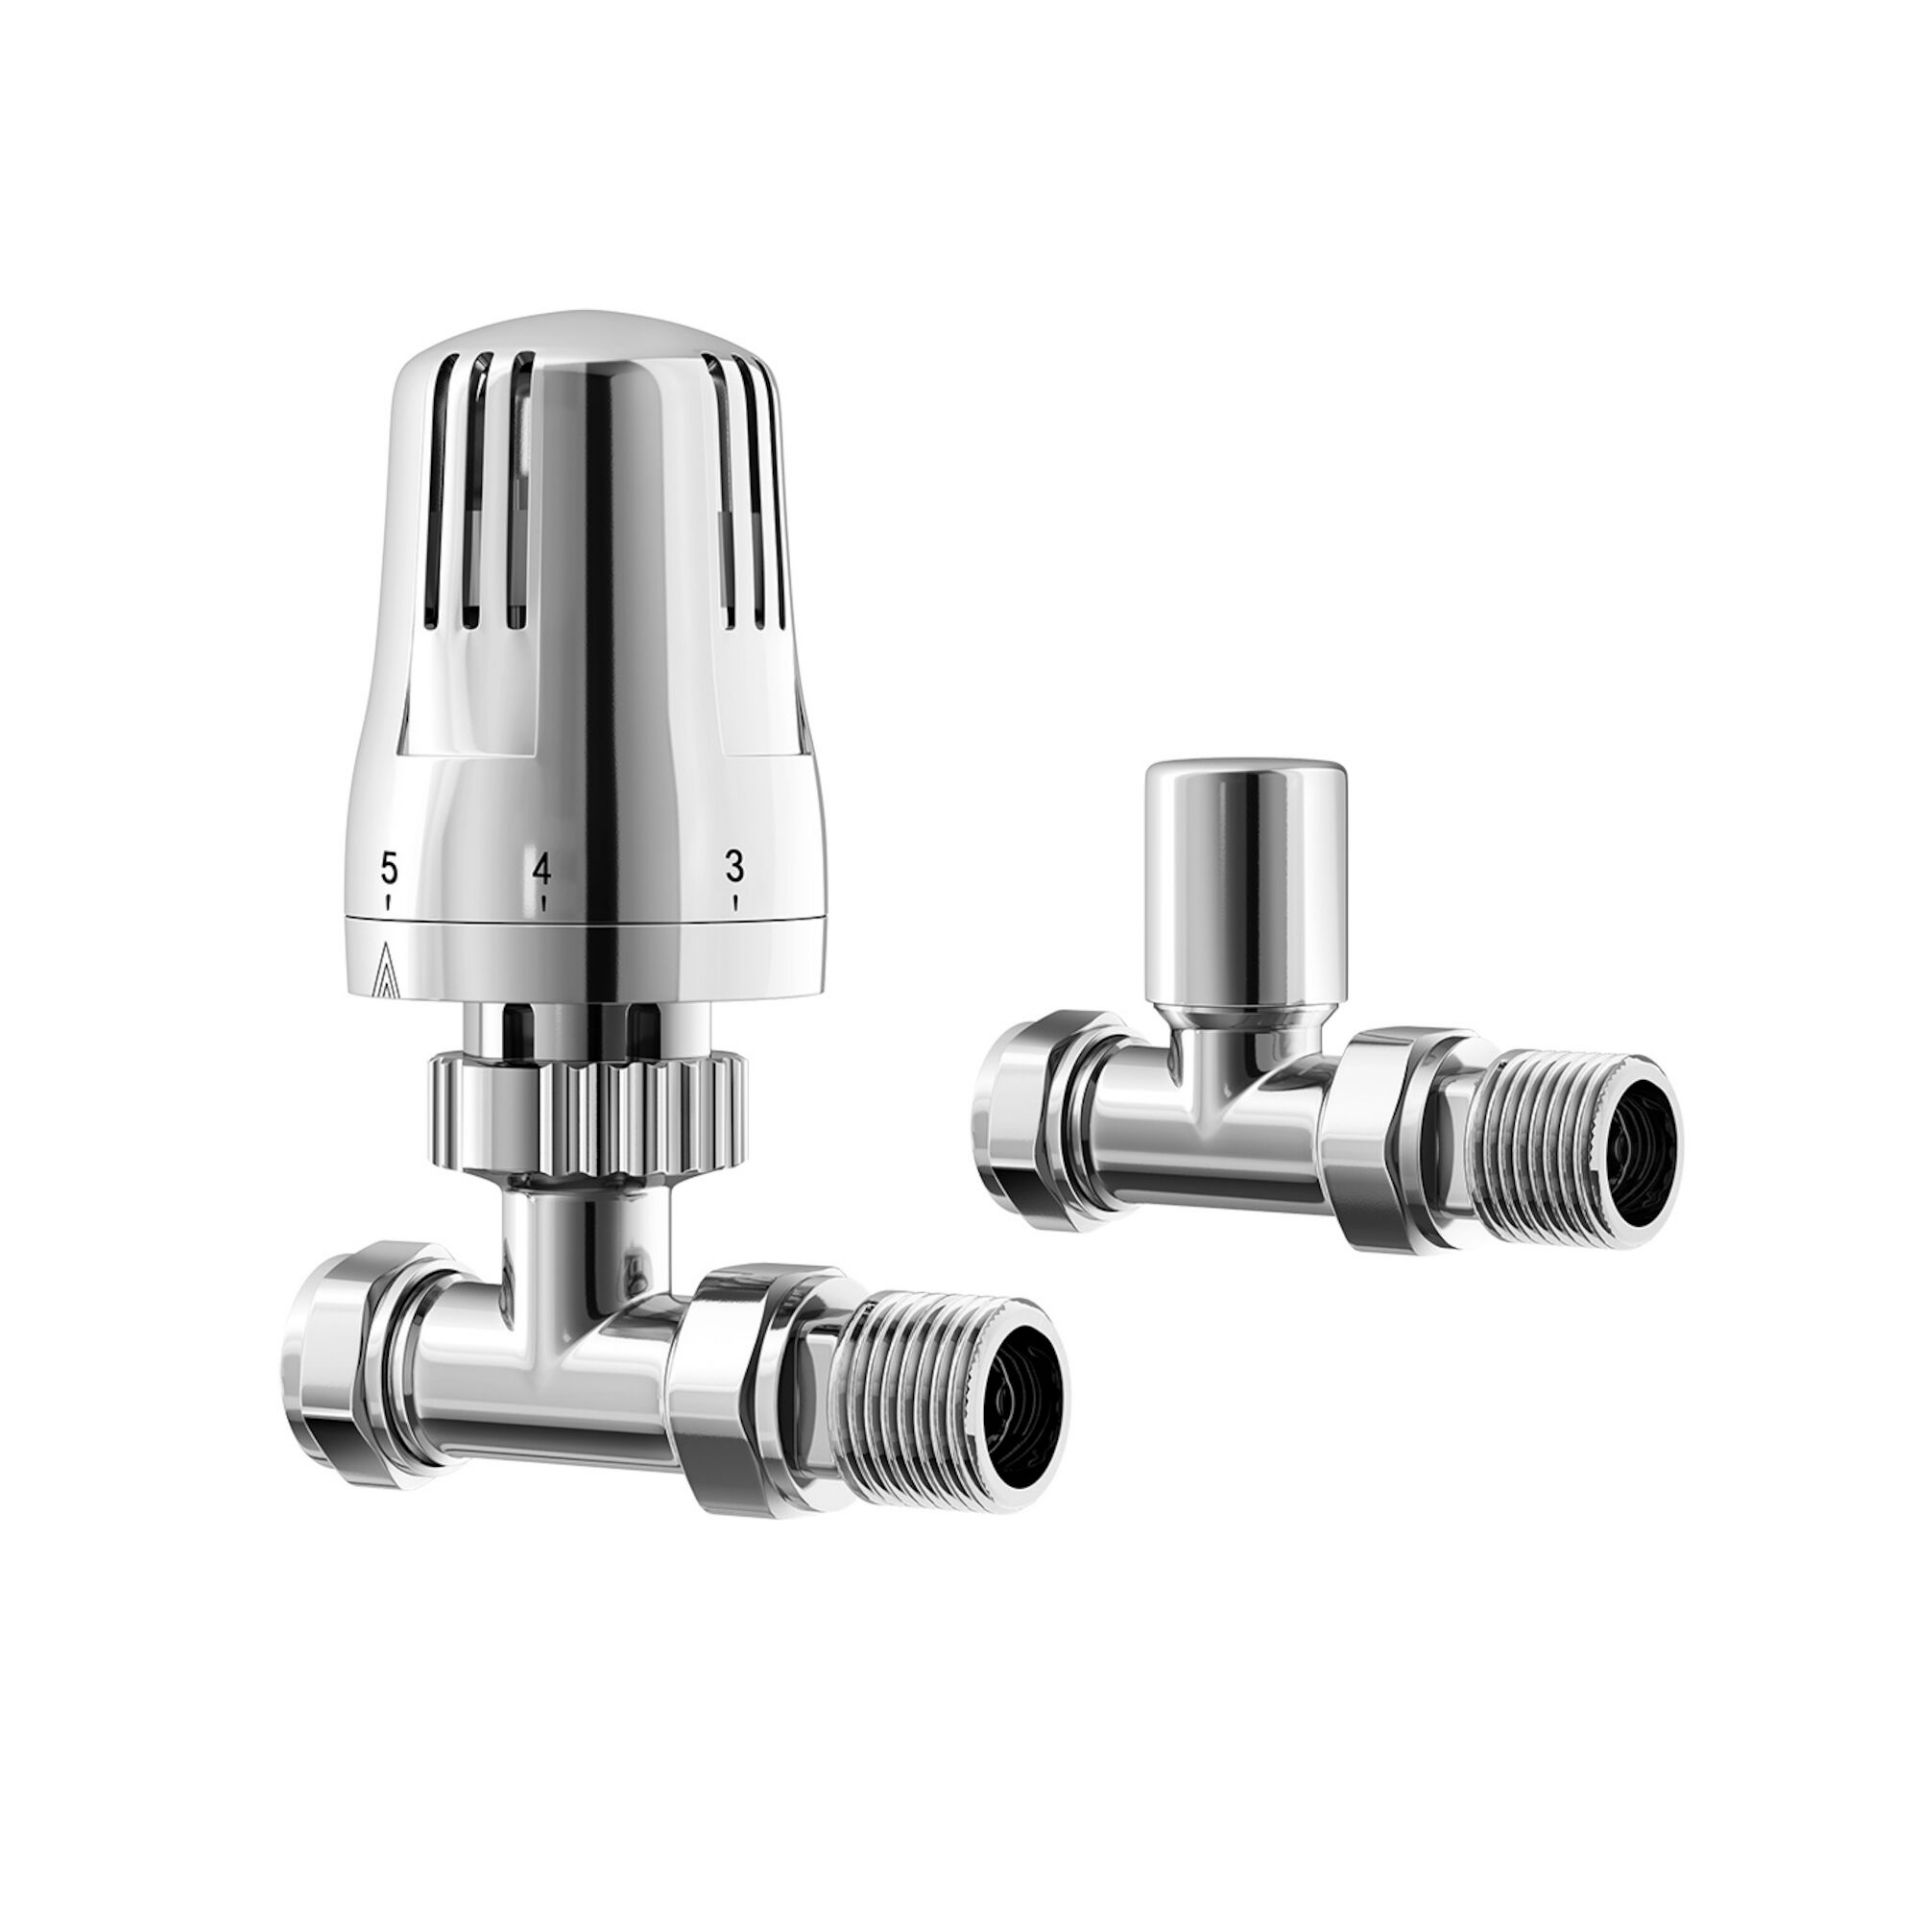 (NV143) 15mm Standard Connection Thermostatic Straight Chrome Radiator Valves Chrome Plated So... - Image 2 of 3